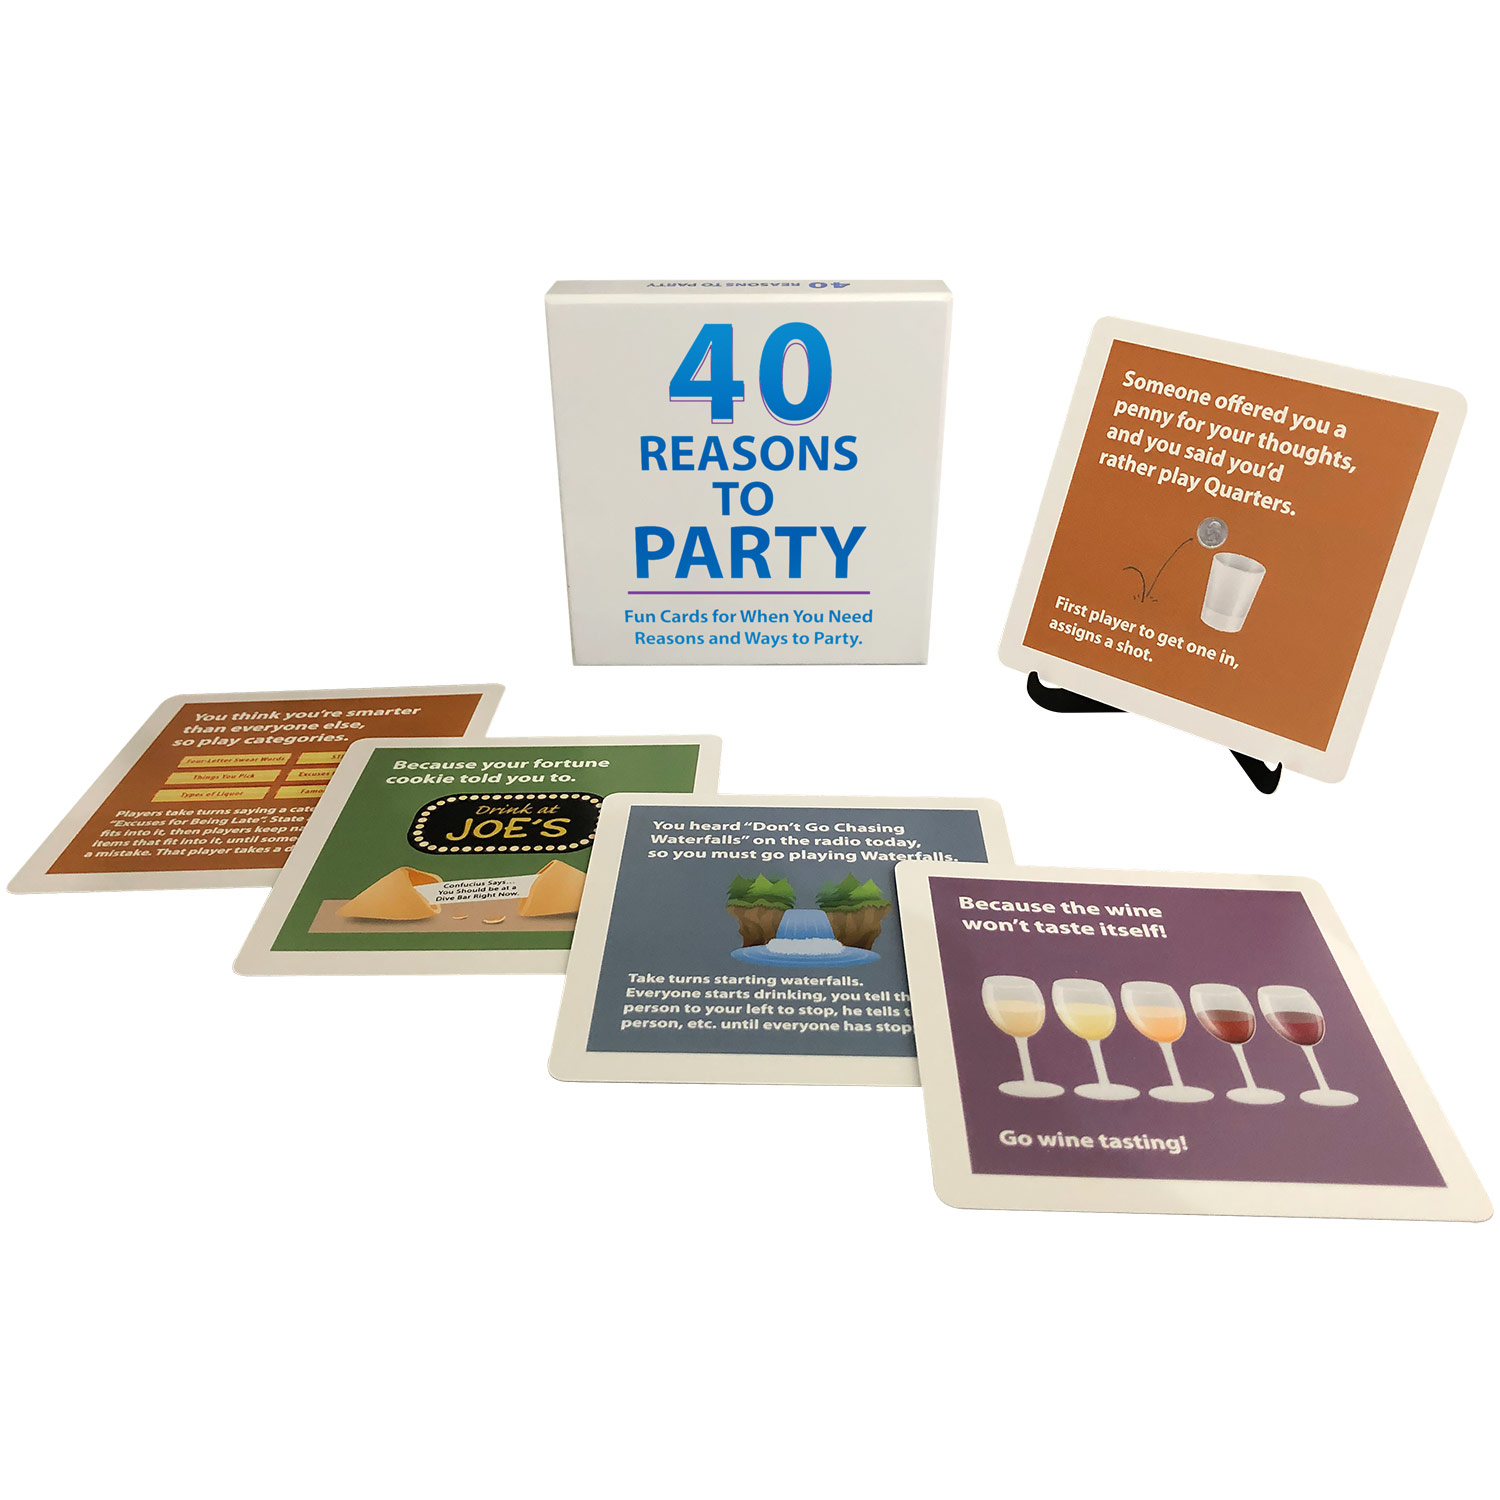 40 REASONS TO PARTY